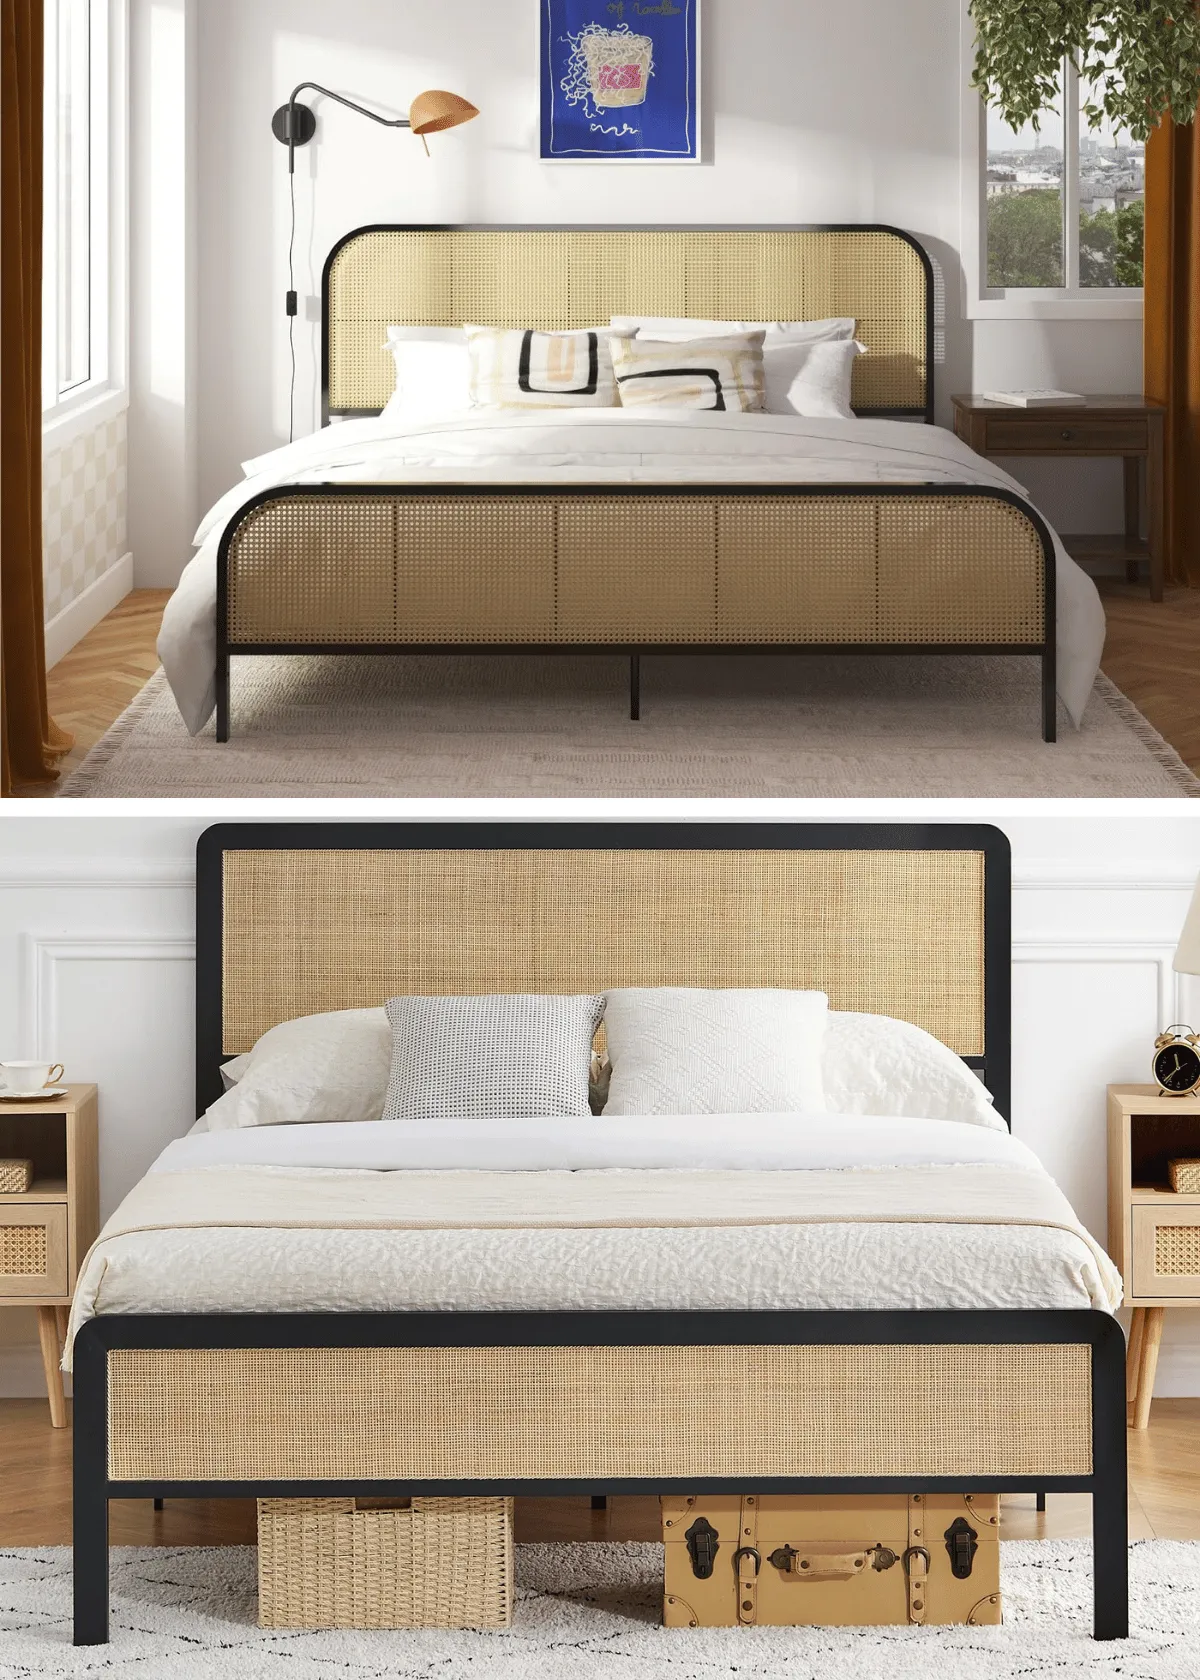 "Why Choose a Cane Bed Frame for Eco-Friendly Bedroom Decor?"